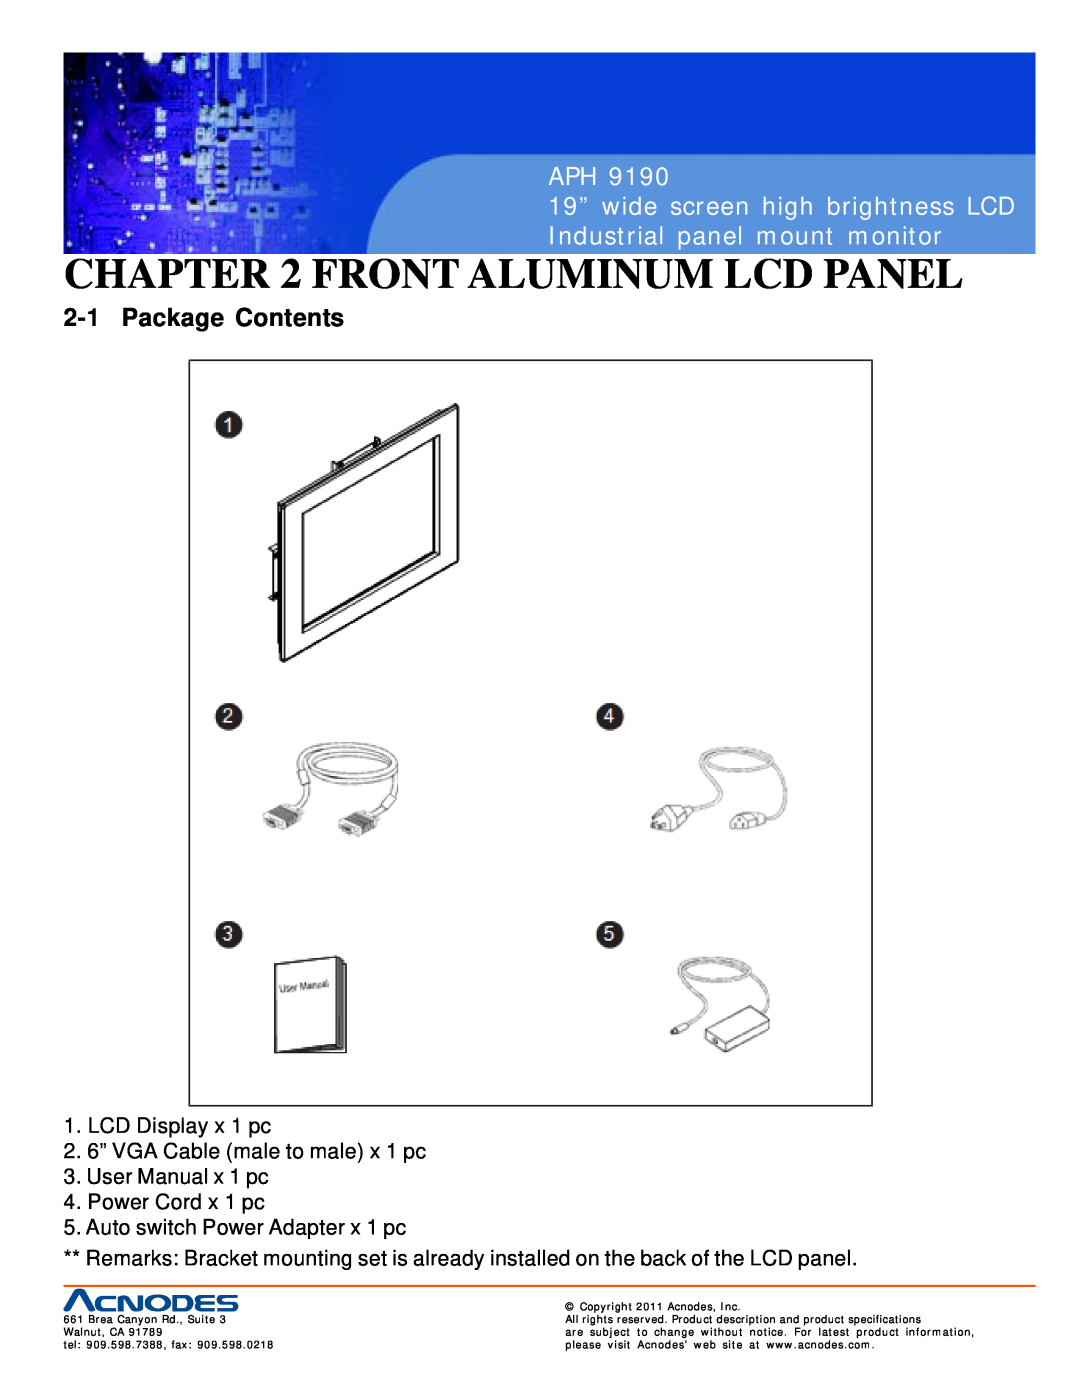 Acnodes APH 9190 user manual Front Aluminum Lcd Panel, Package Contents 